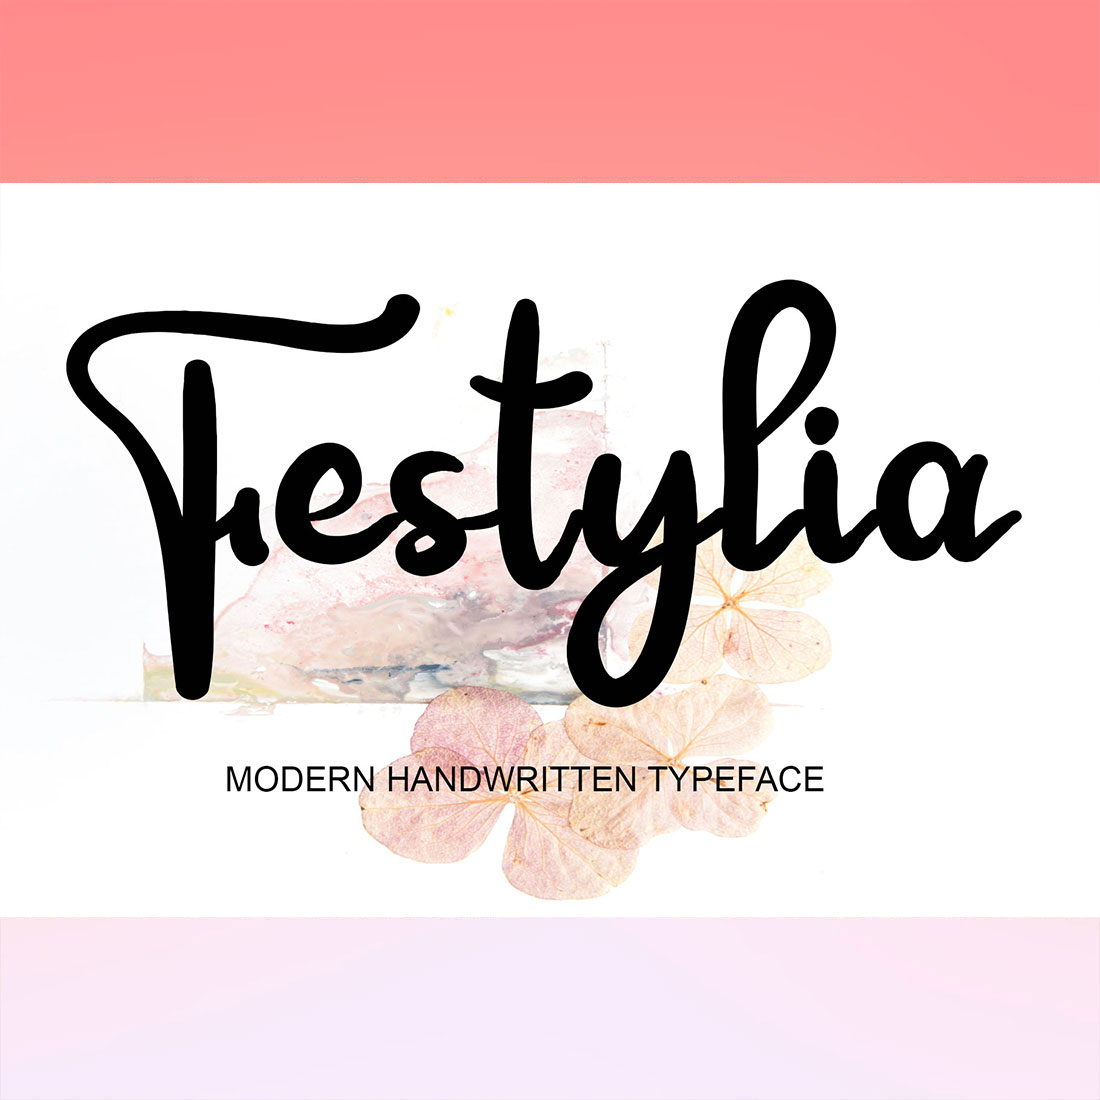 Pink and white background with the words freestyleia written in black.